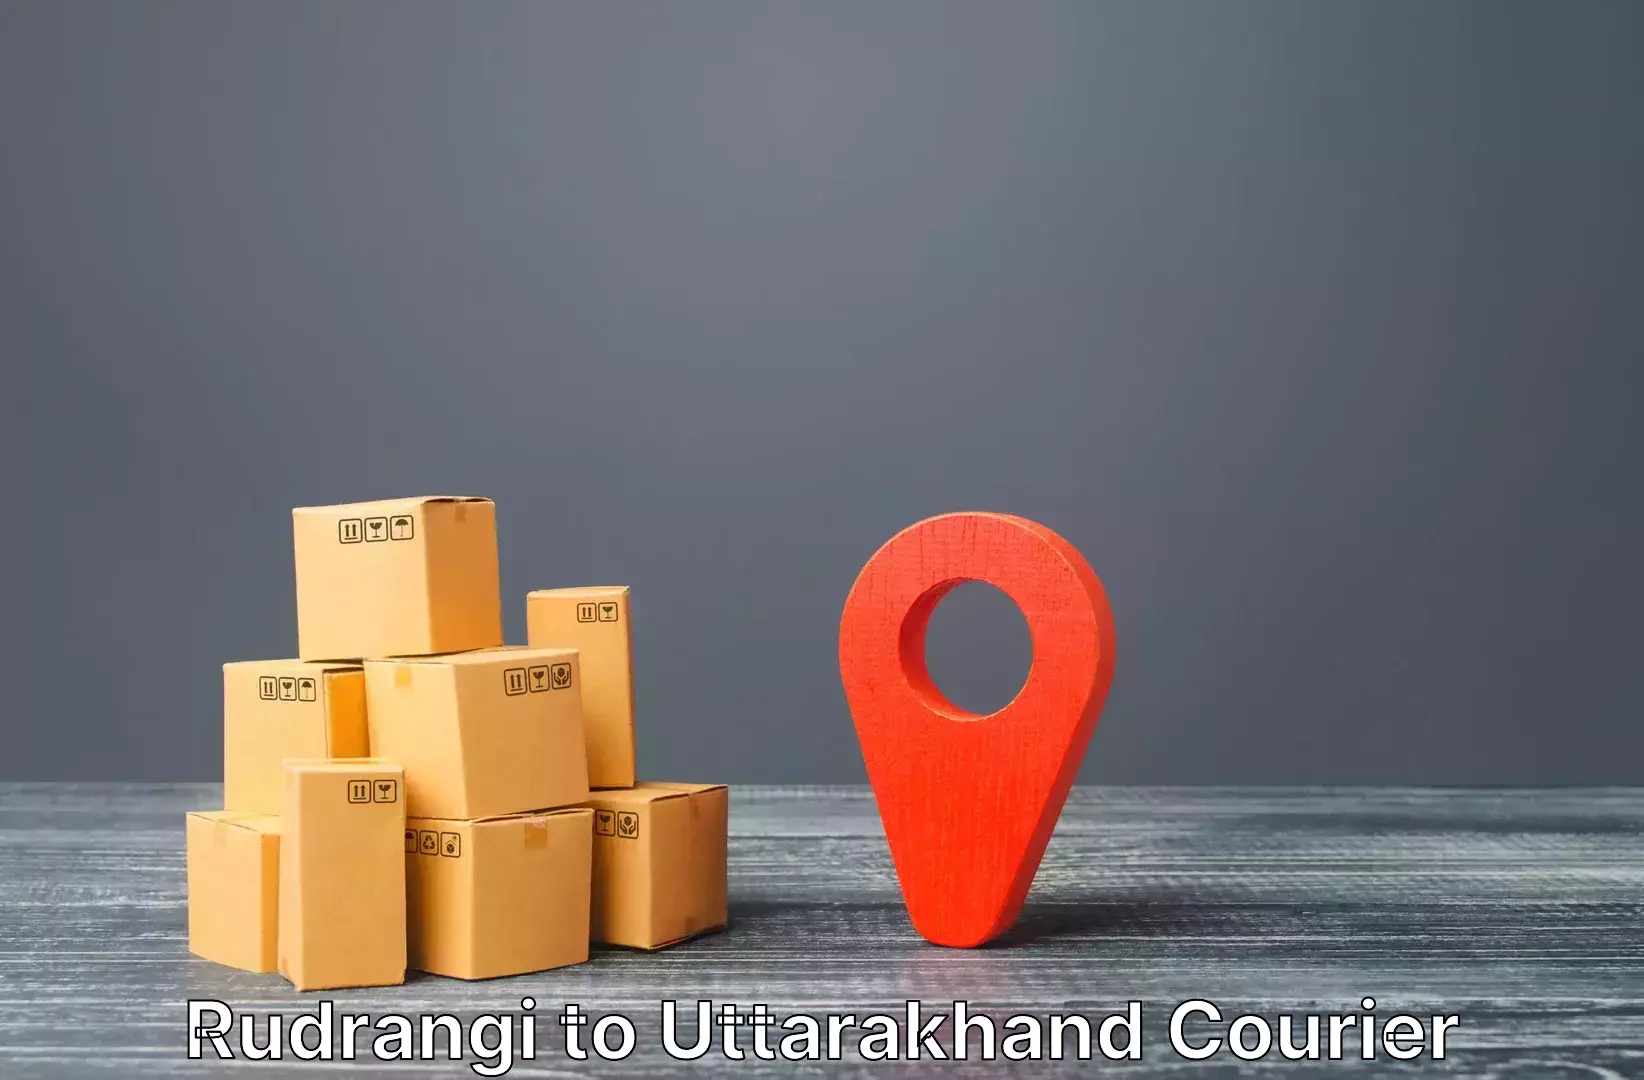 Baggage shipping experience Rudrangi to IIT Roorkee